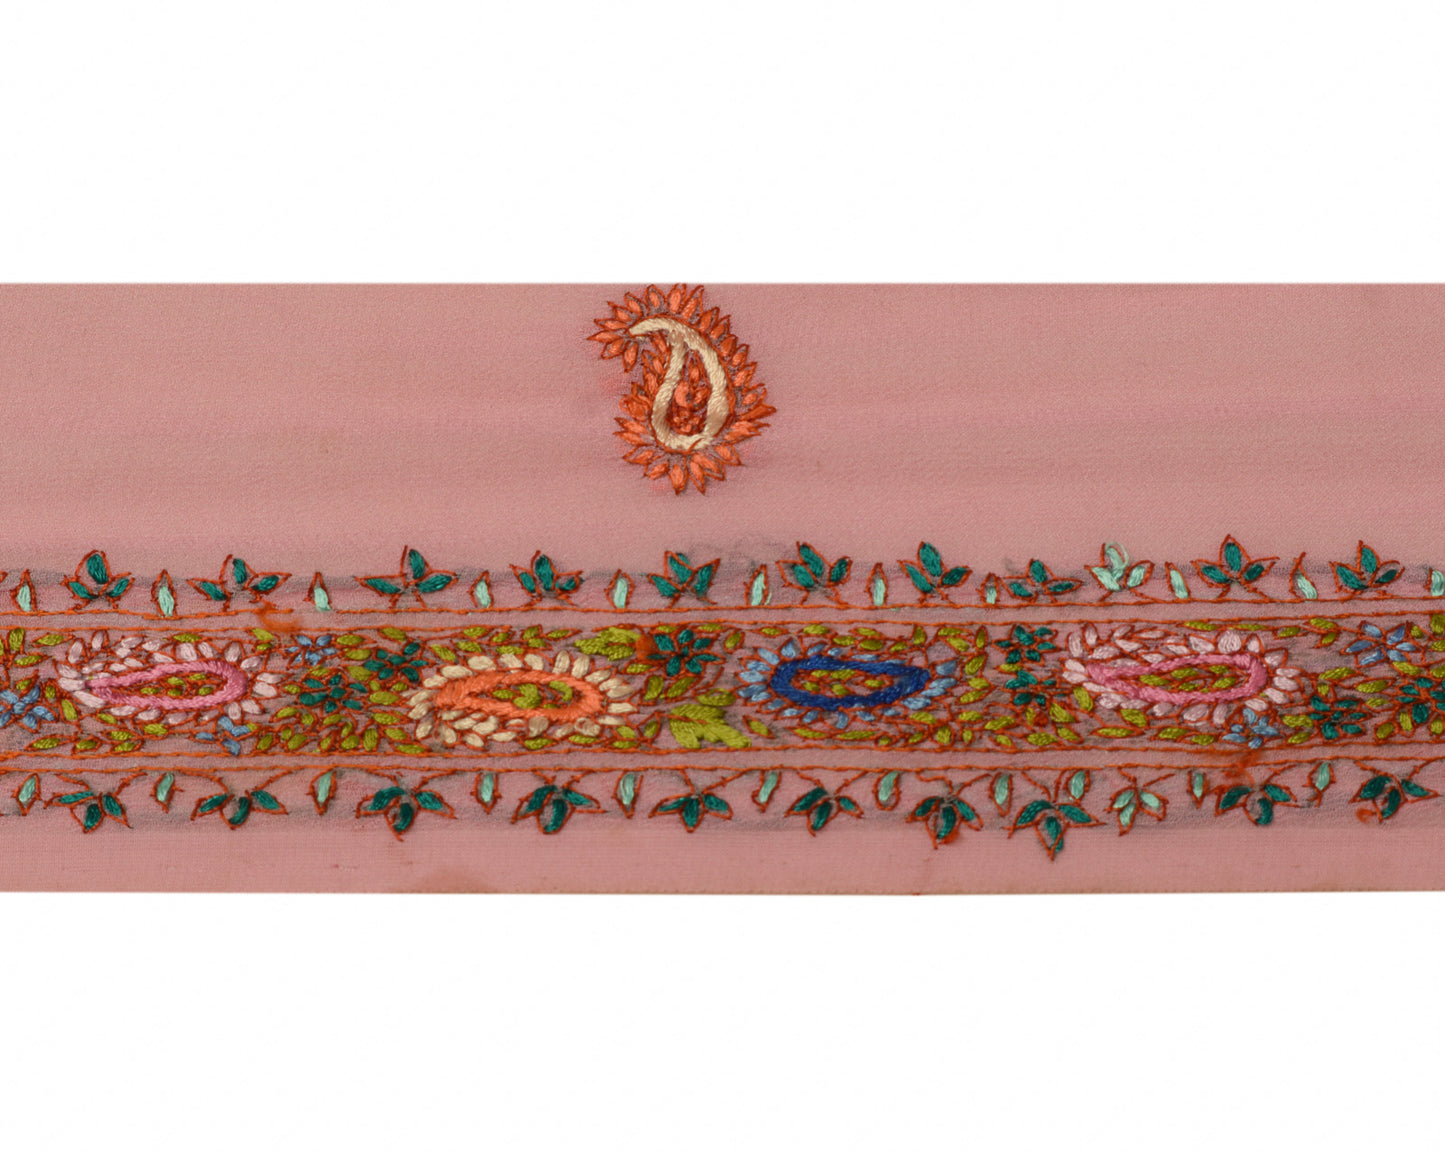 Sushila Vintage Pink Saree Border Indian Craft Sewing Trim Hand Embroidered Lace